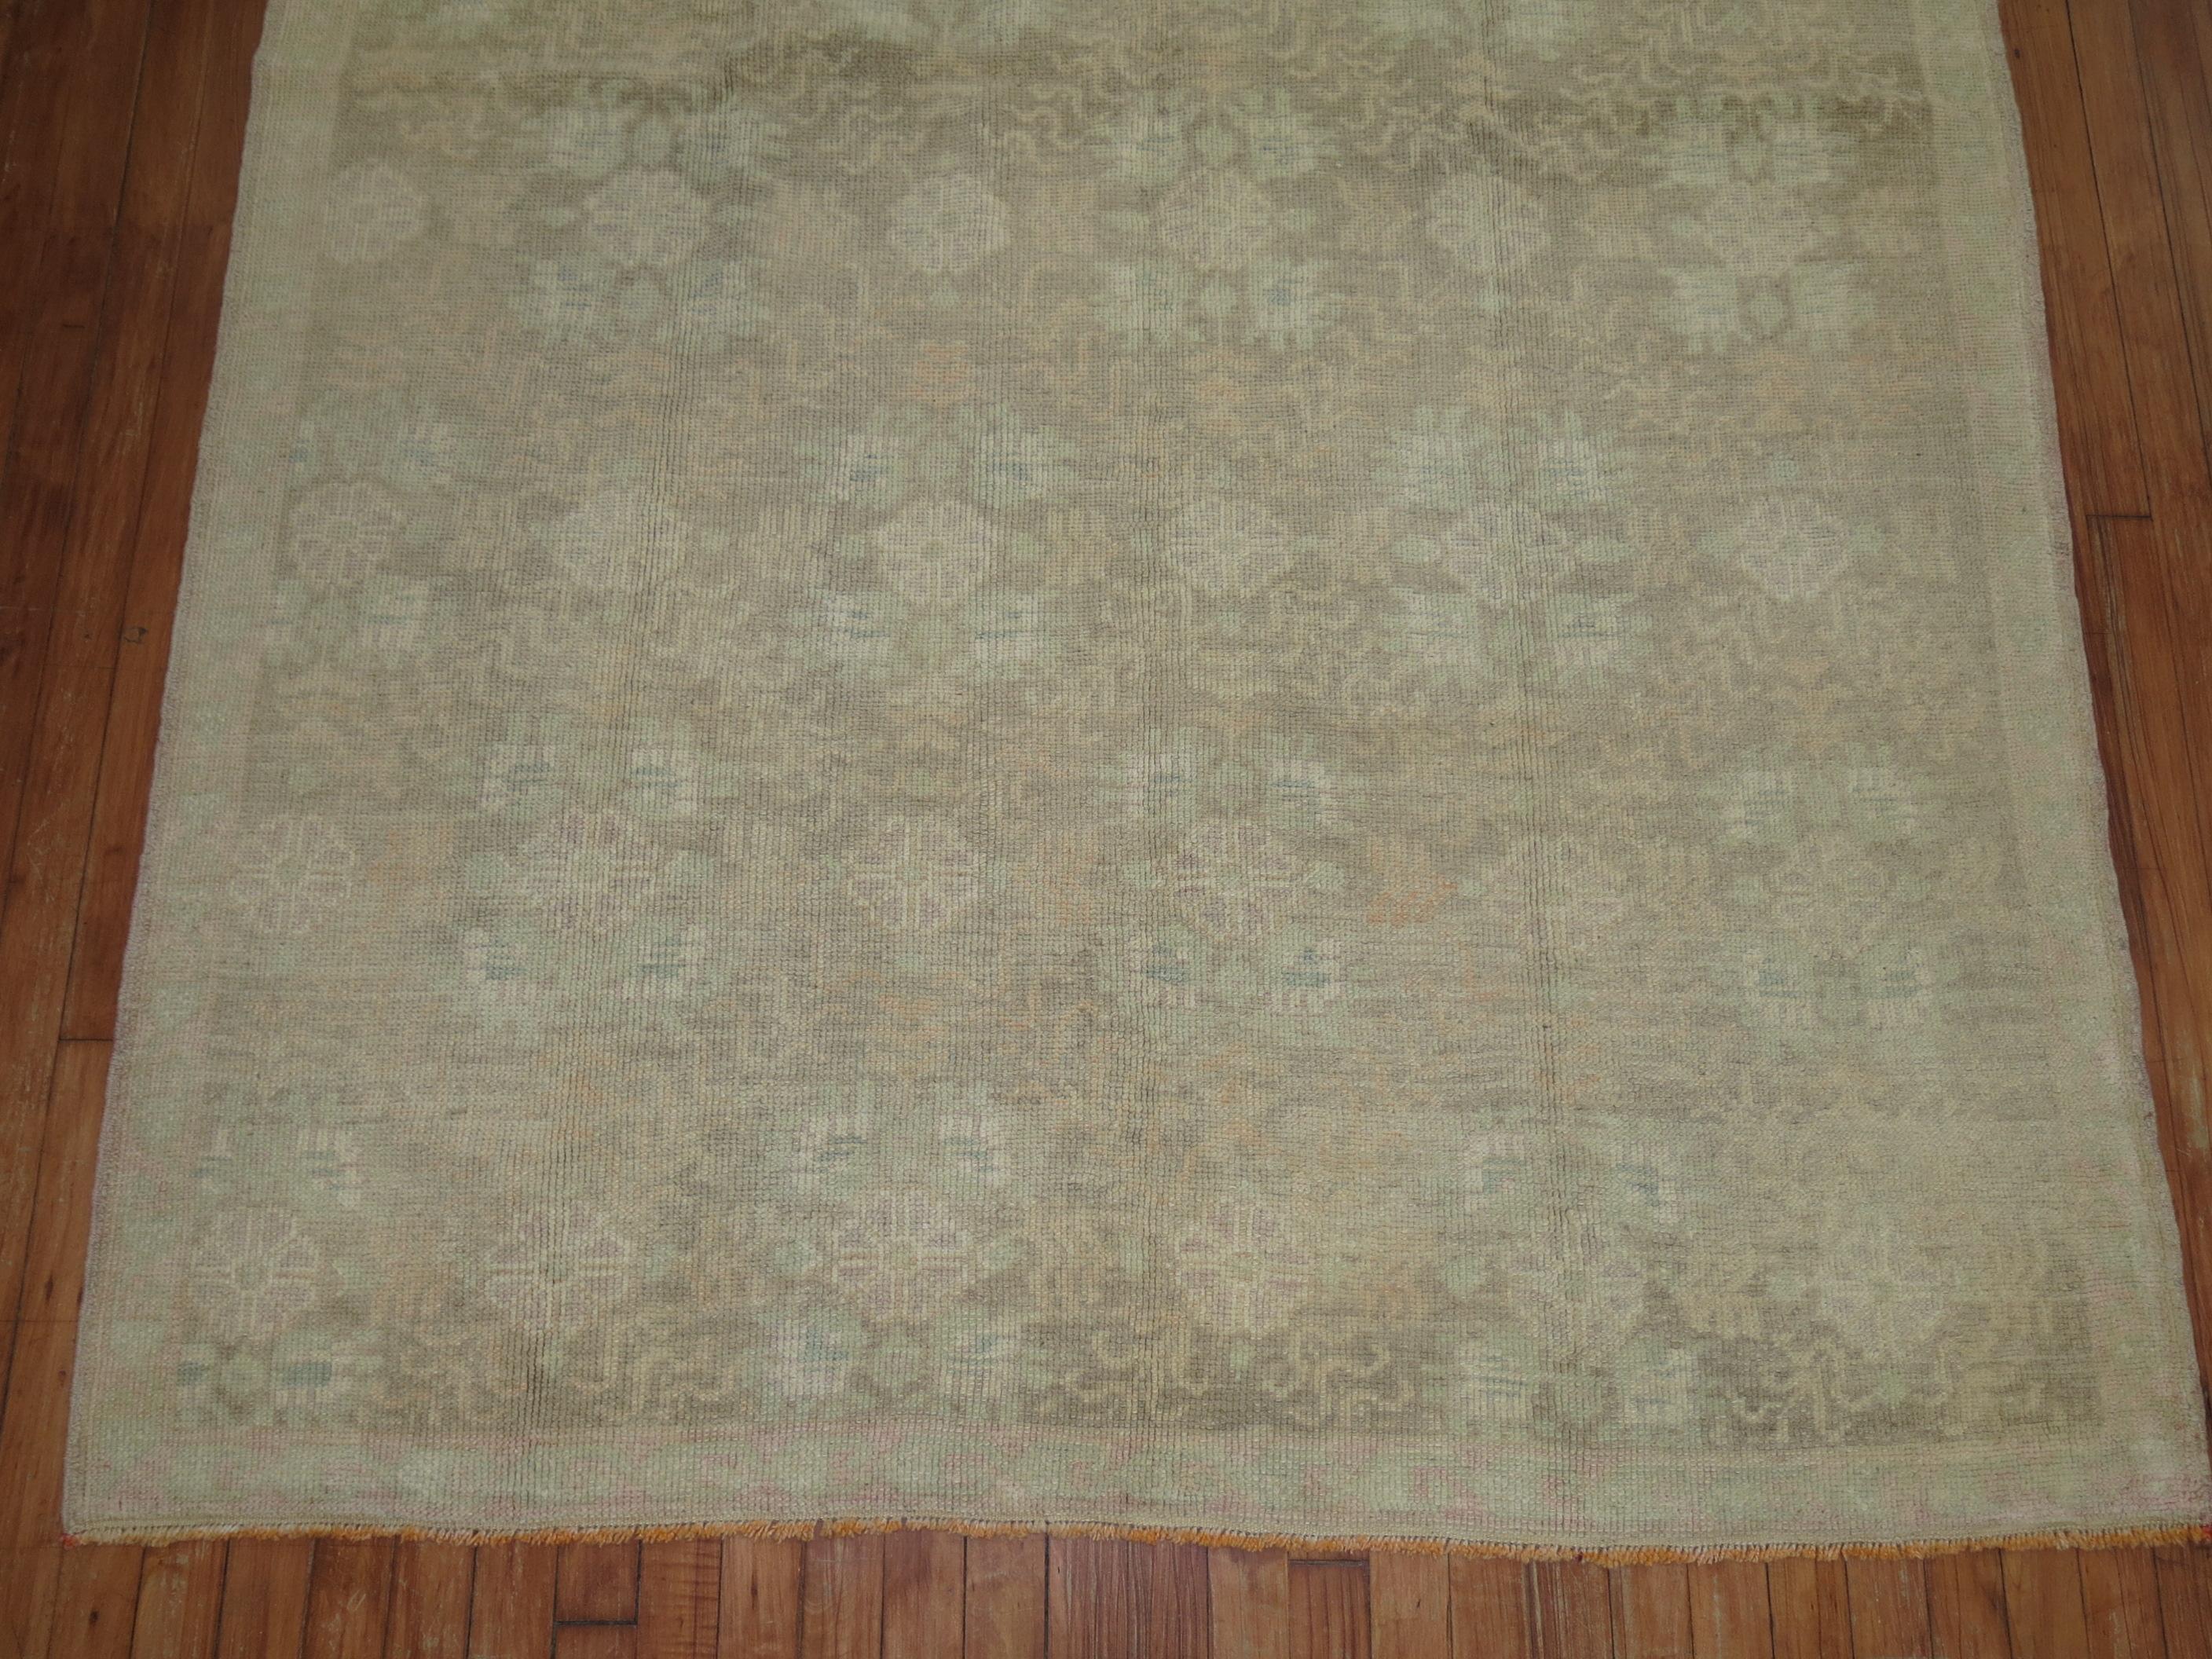 A lovely Turkish Oushak with a soft, muted all-over floral design.